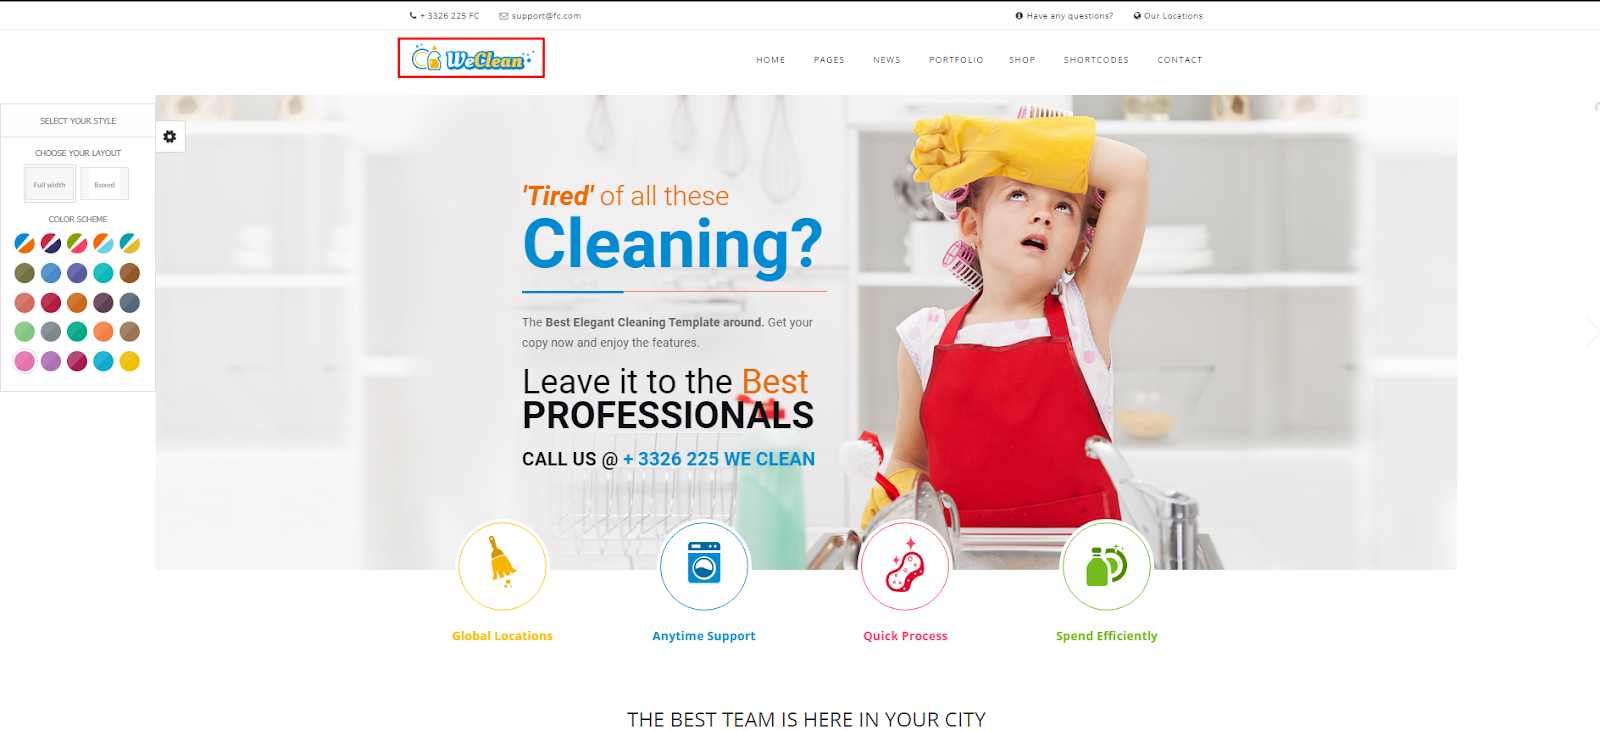 We Clean - Maid Service and Cleaning Agency WordPress theme